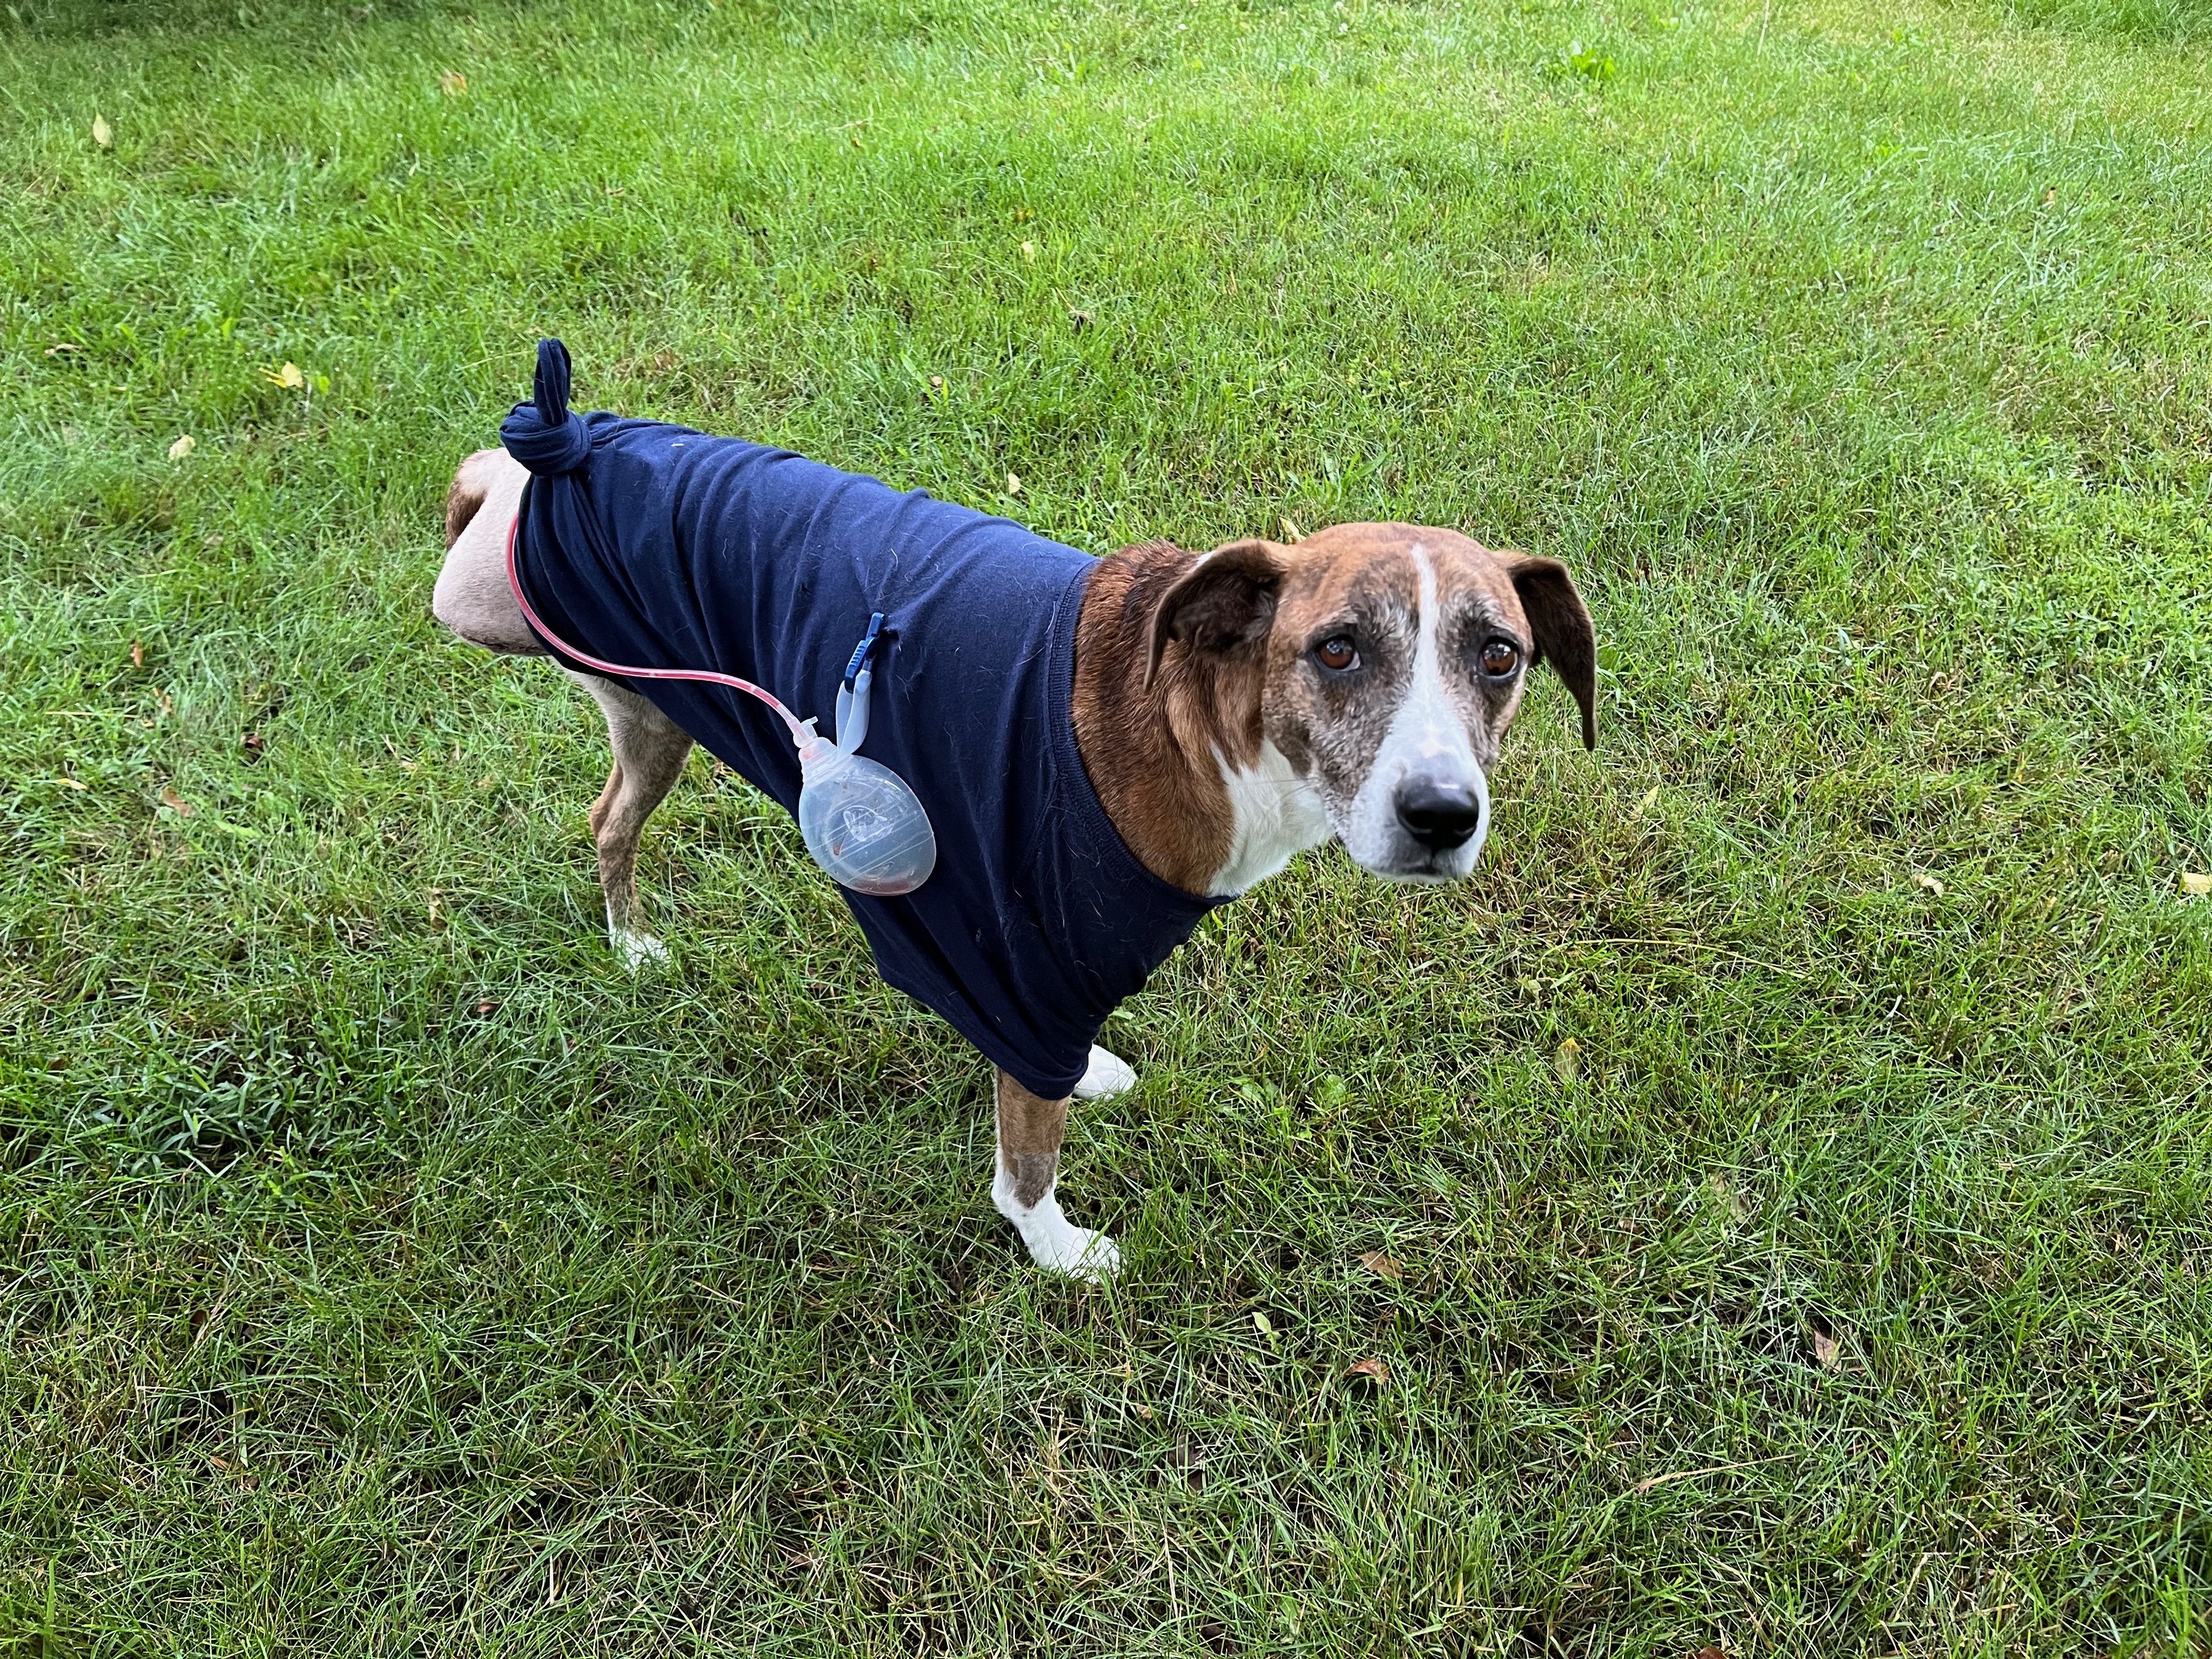 Juno in the yard days after amputation surgery wearing a child’s t-shirt to which her wound drain reservoir is clipped